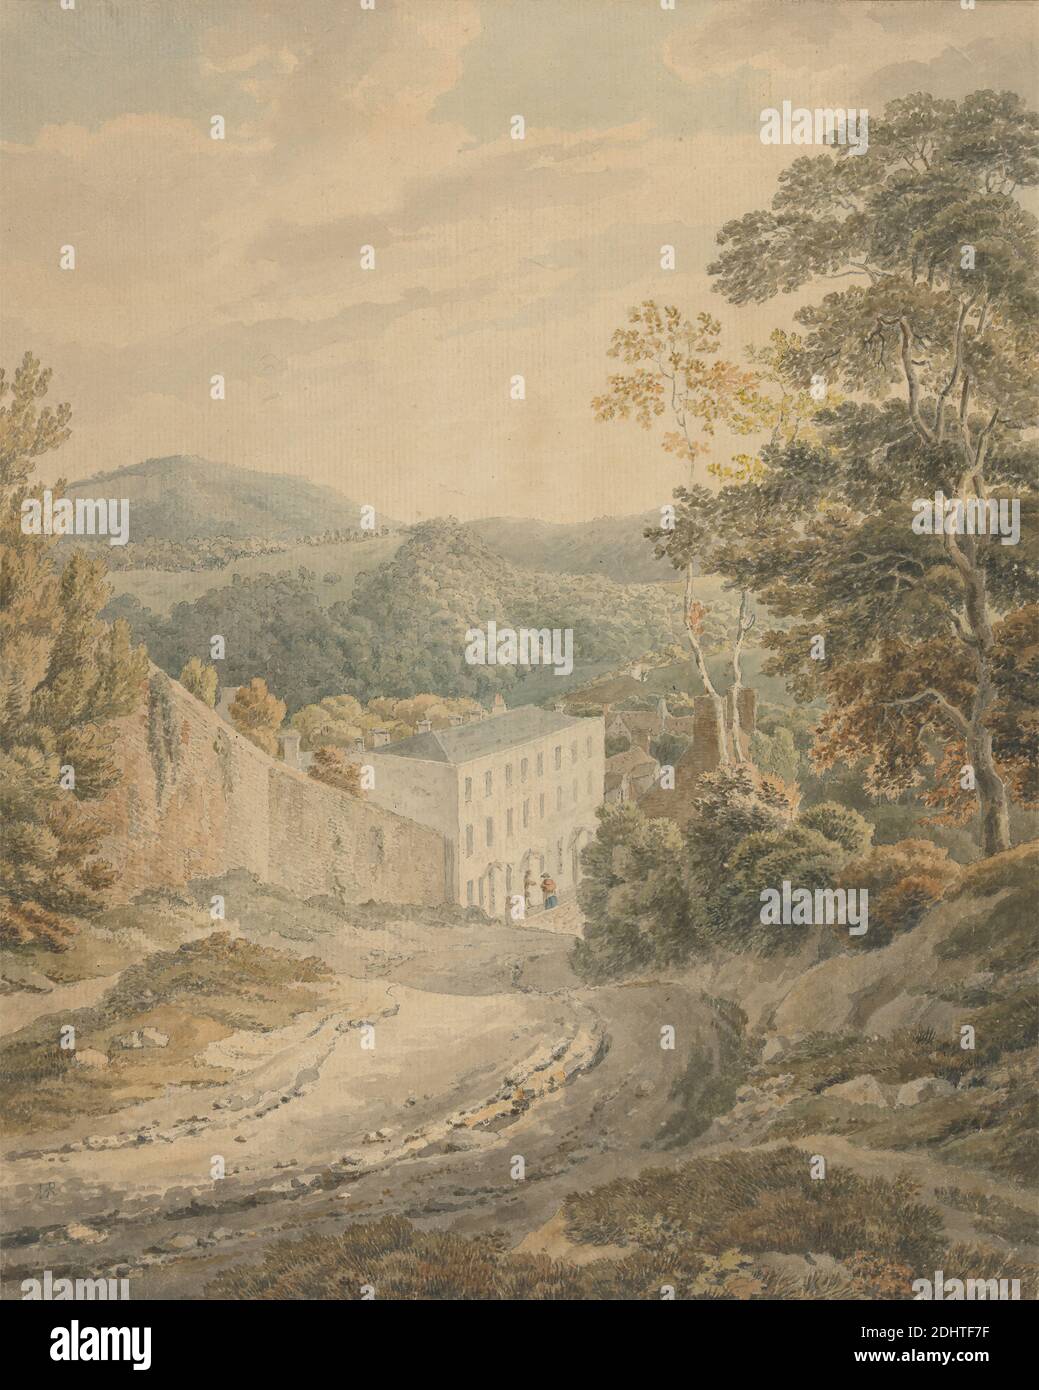 Landscape, Looking Downhill to a Village Dominated by a Large Three-Storied Stone House, Michael 'Angelo' Rooker, 1746–1801, British, undated, Watercolor over graphite on moderately thick, slightly textured, cream laid paper, Sheet: 11 5/8 x 9 1/4 inches (29.5 x 23.5 cm), architectural subject, hills, house, landscape, mansion, path, road, trees Stock Photo